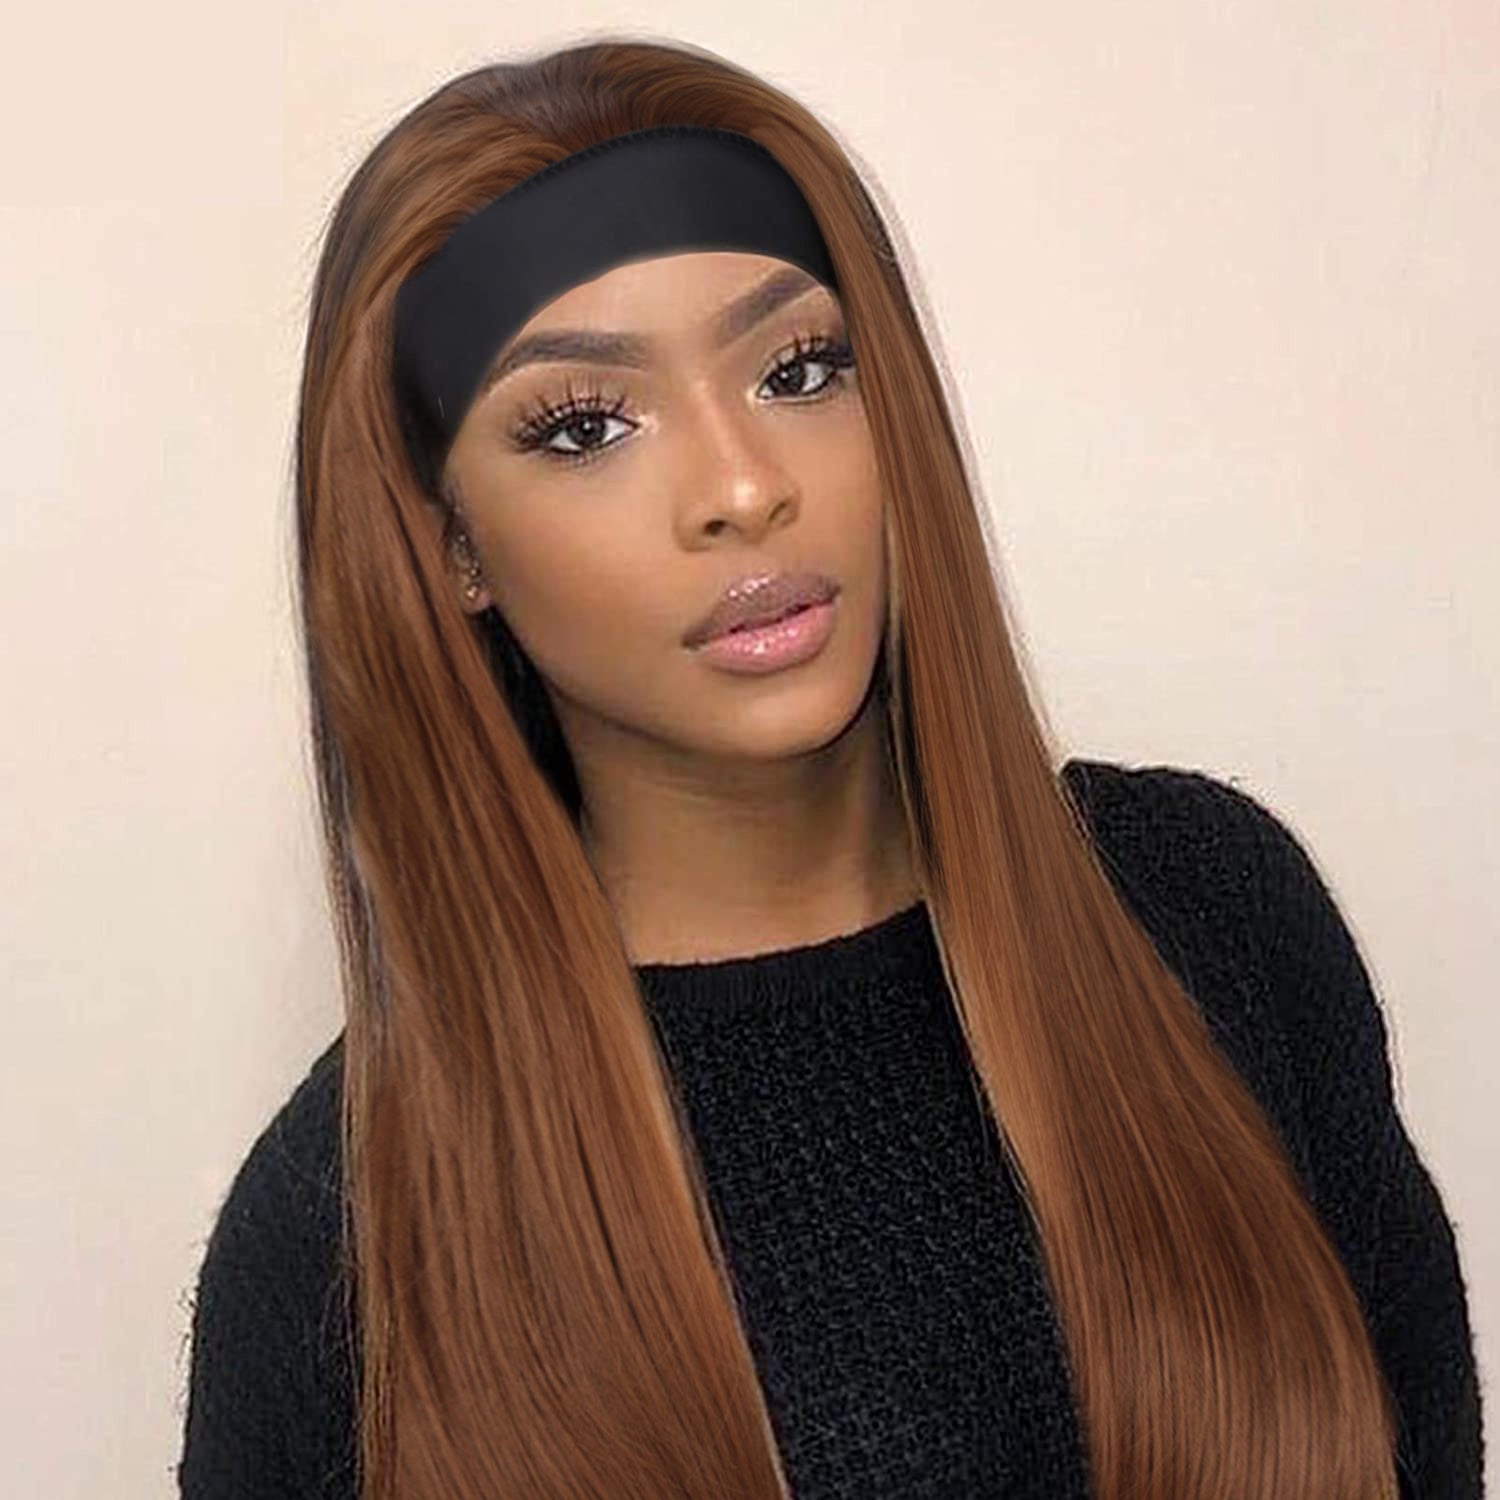 Pre Colored 30# Brown Human Hair Straight Headband Wig Affordable Price Clearance Sales